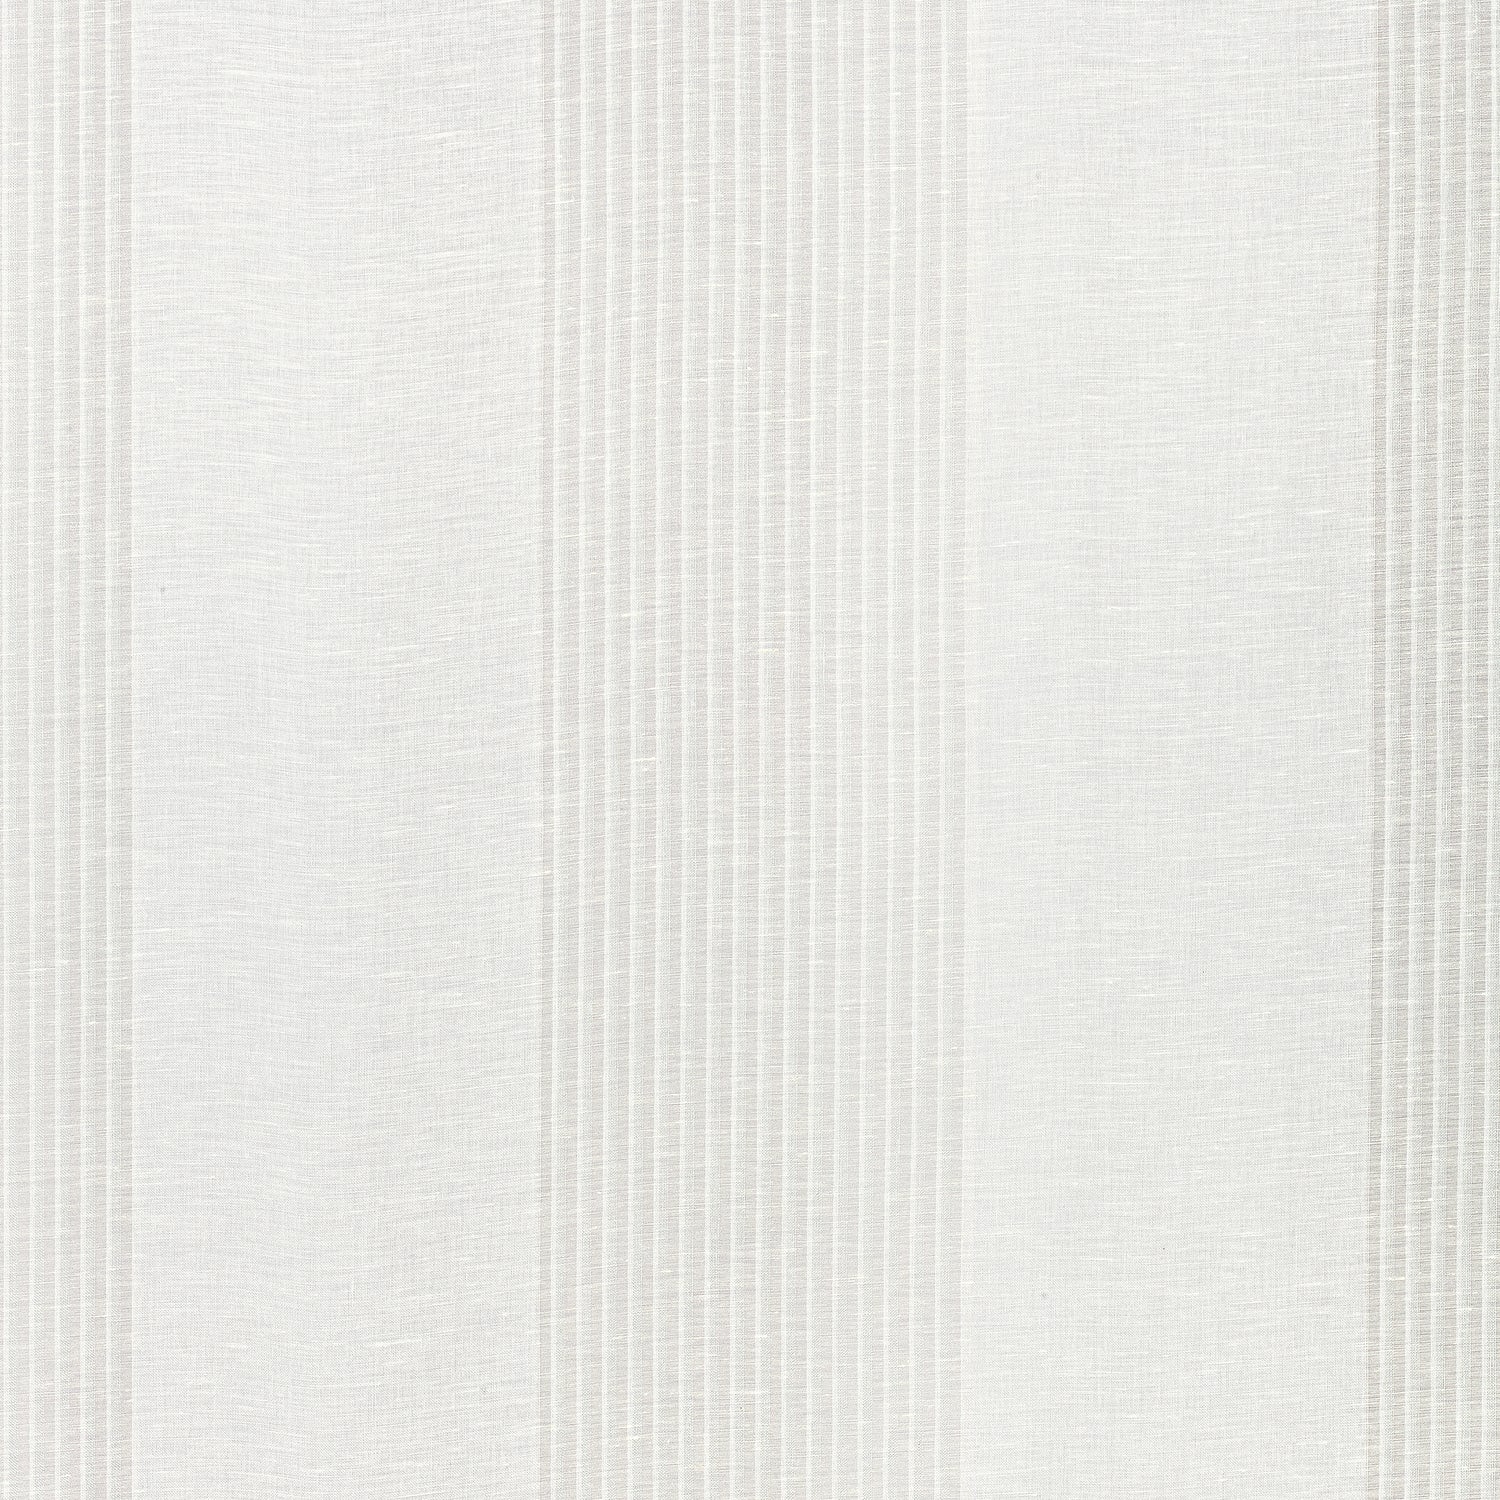 Mystic Stripe fabric in mist color - pattern number FWW7113 - by Thibaut in the Atmosphere collection